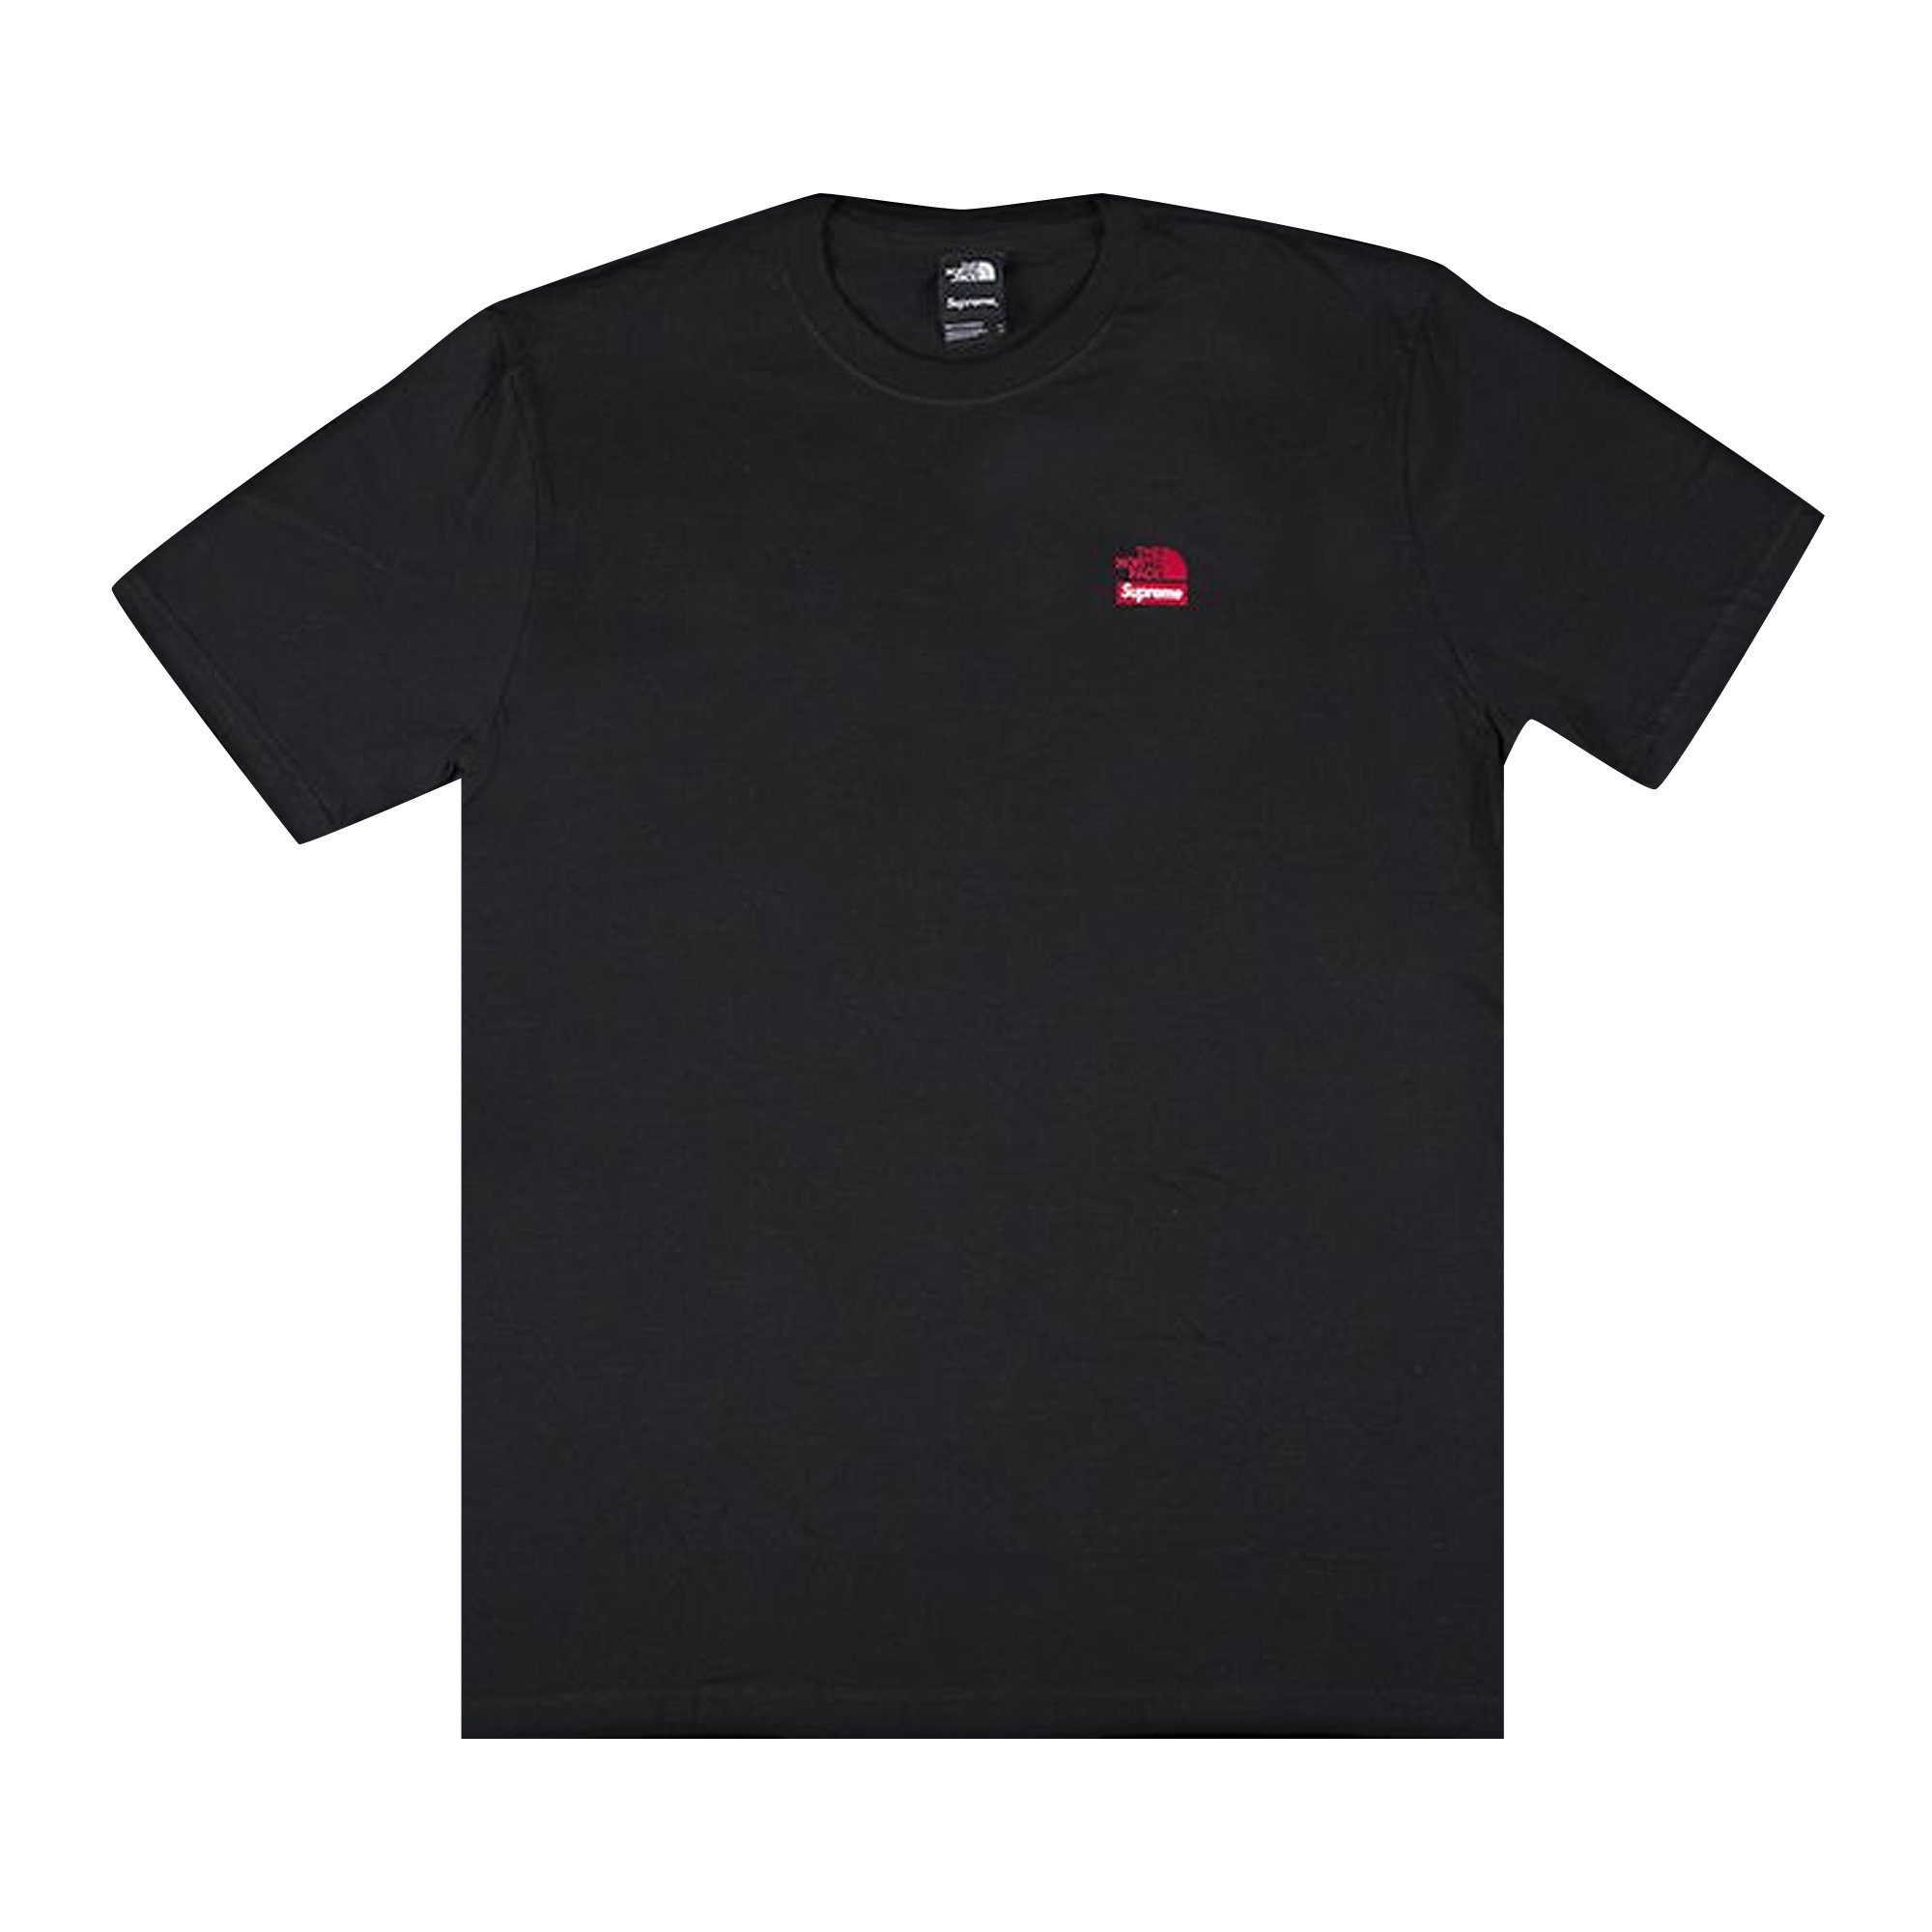 Buy Supreme x The North Face Statue Of Liberty T-Shirt 'Black